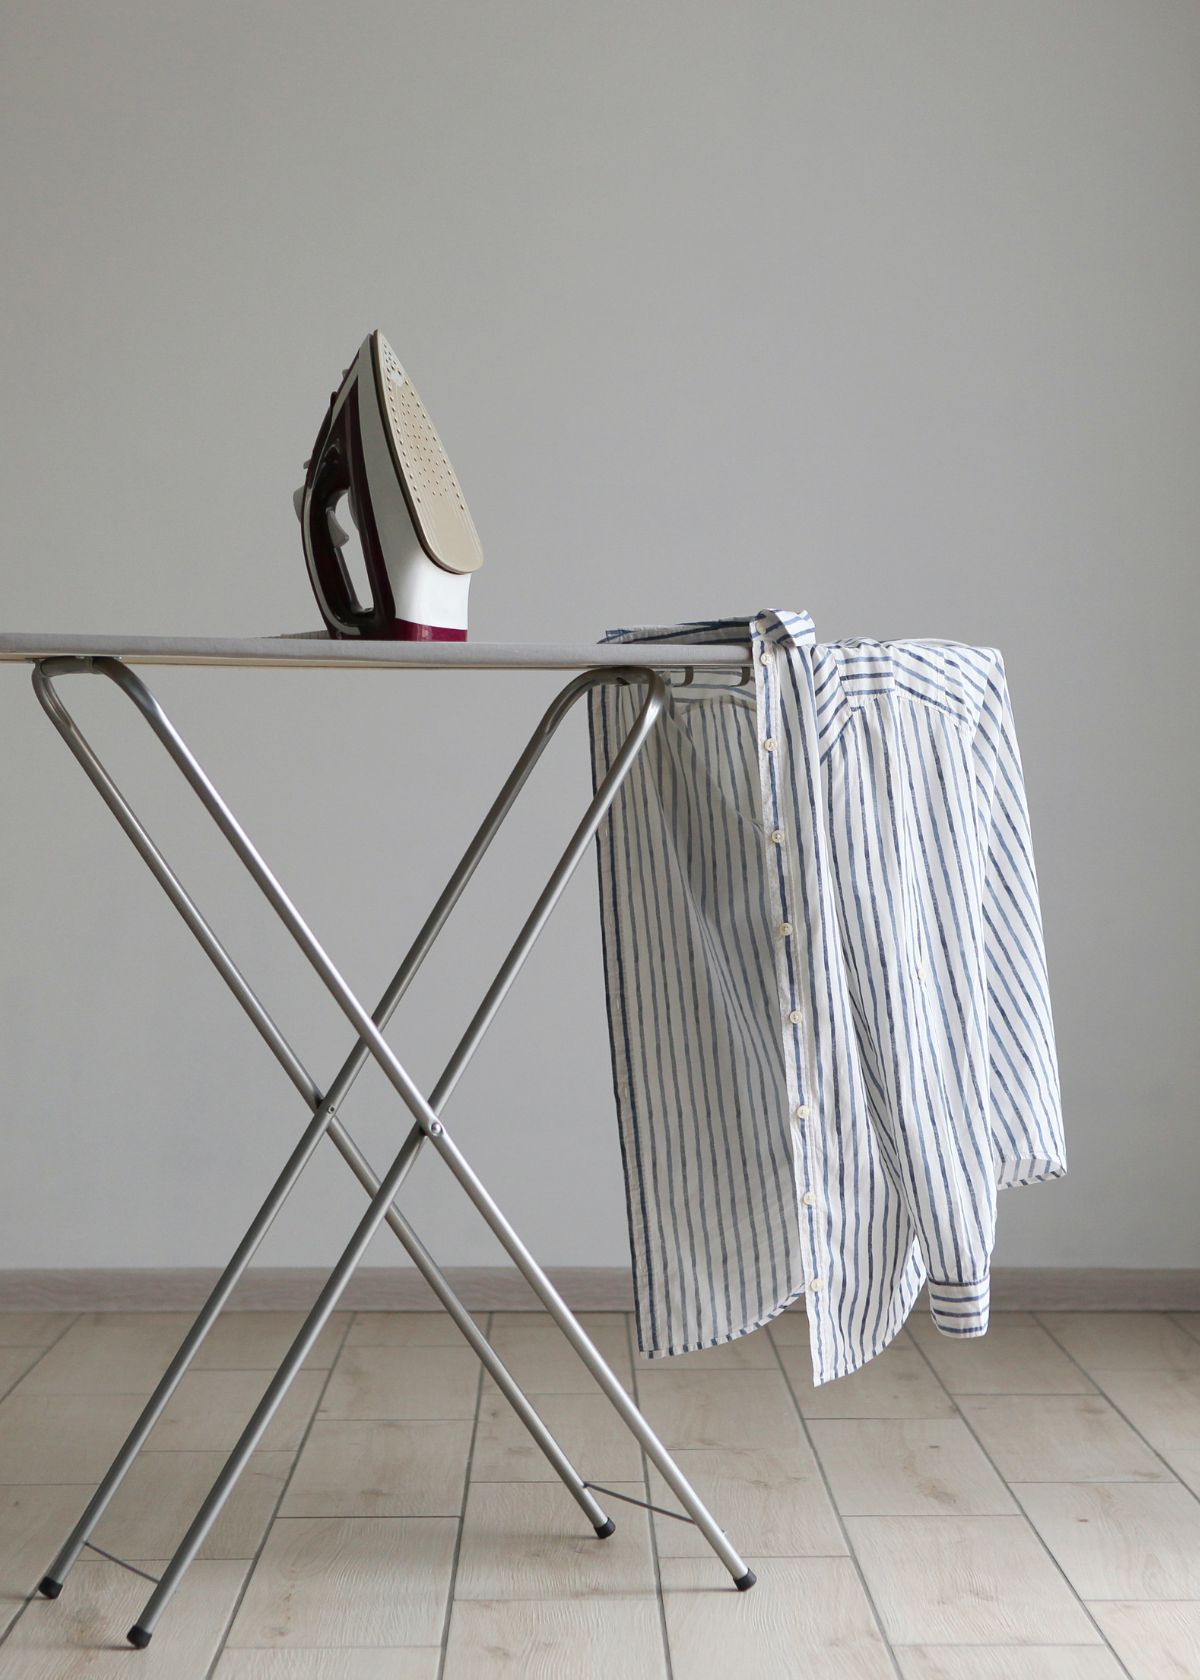 How to Close an Ironing Board